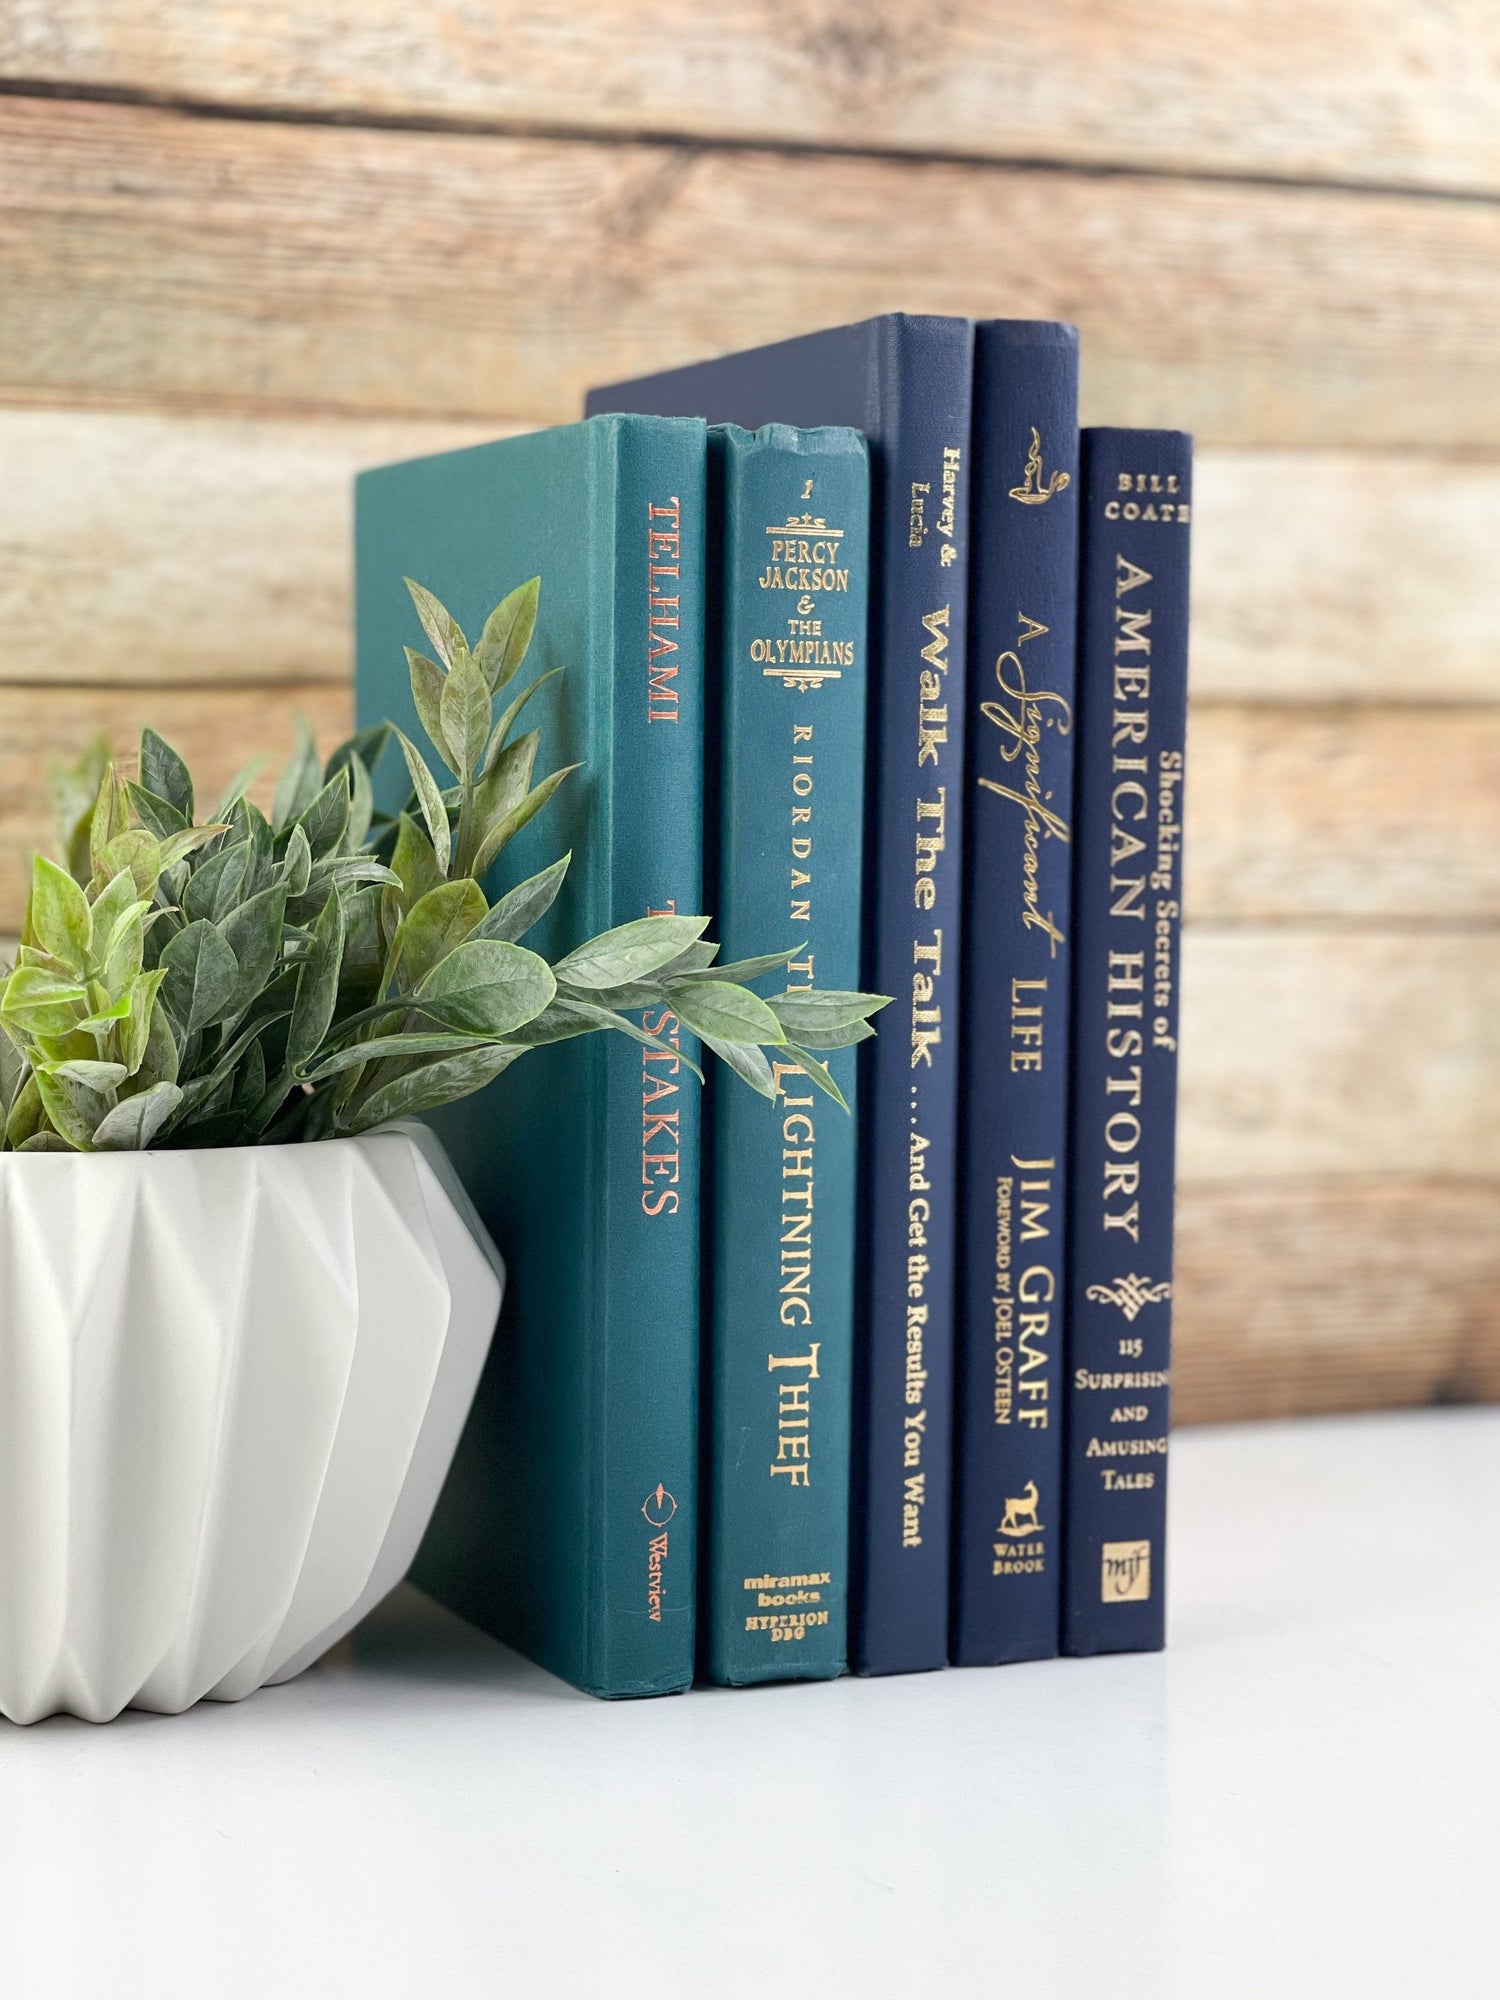 Blue and Green Books for Decor